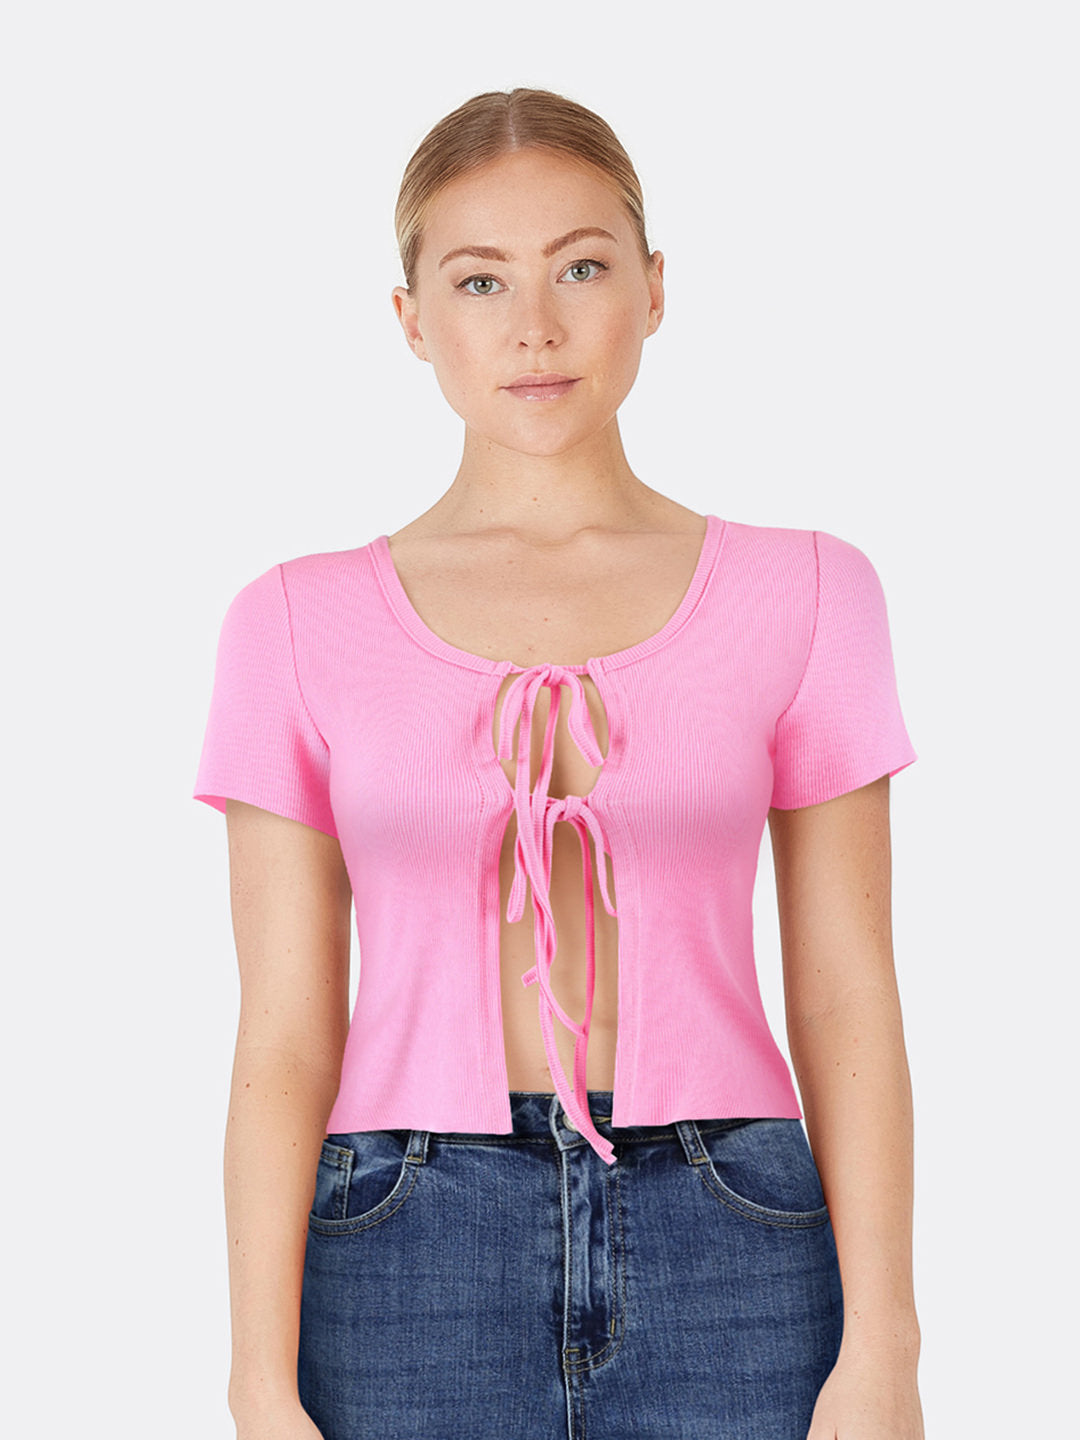 Short-Sleeved Vest Cardigan with Laces Fuchsia Front Close | Jolovies